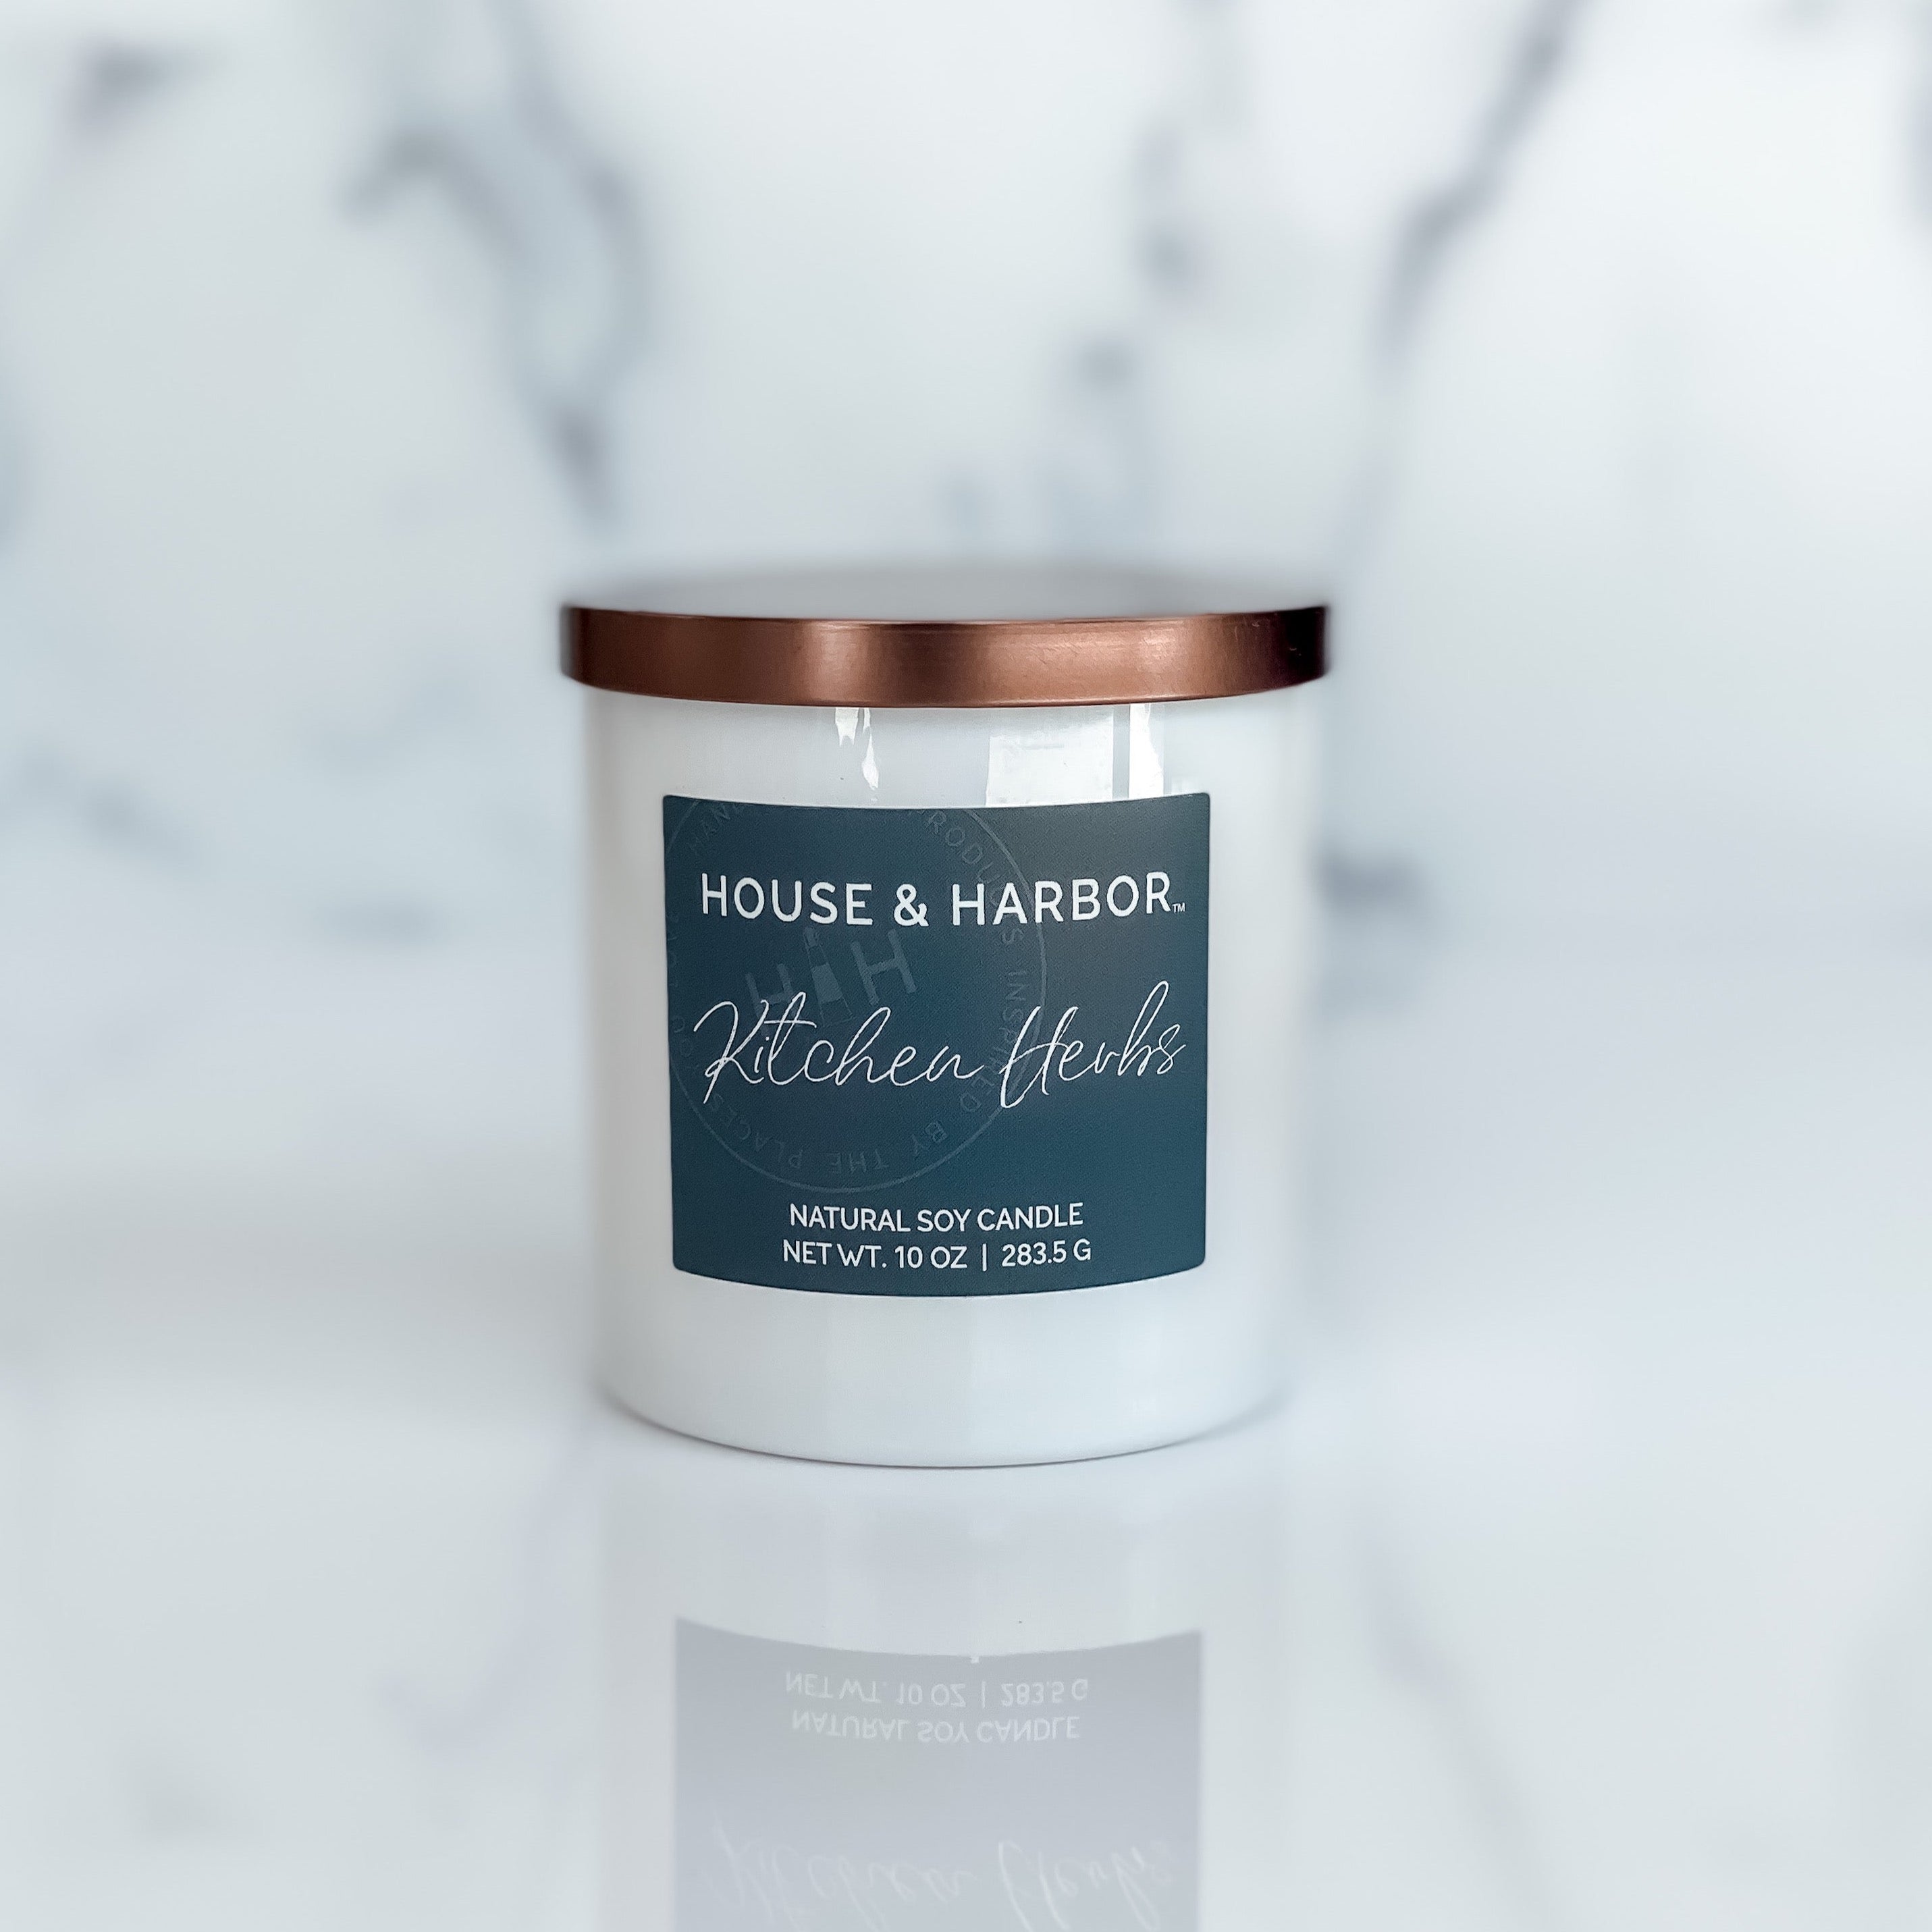 Kitchen Herbs Soy Candle